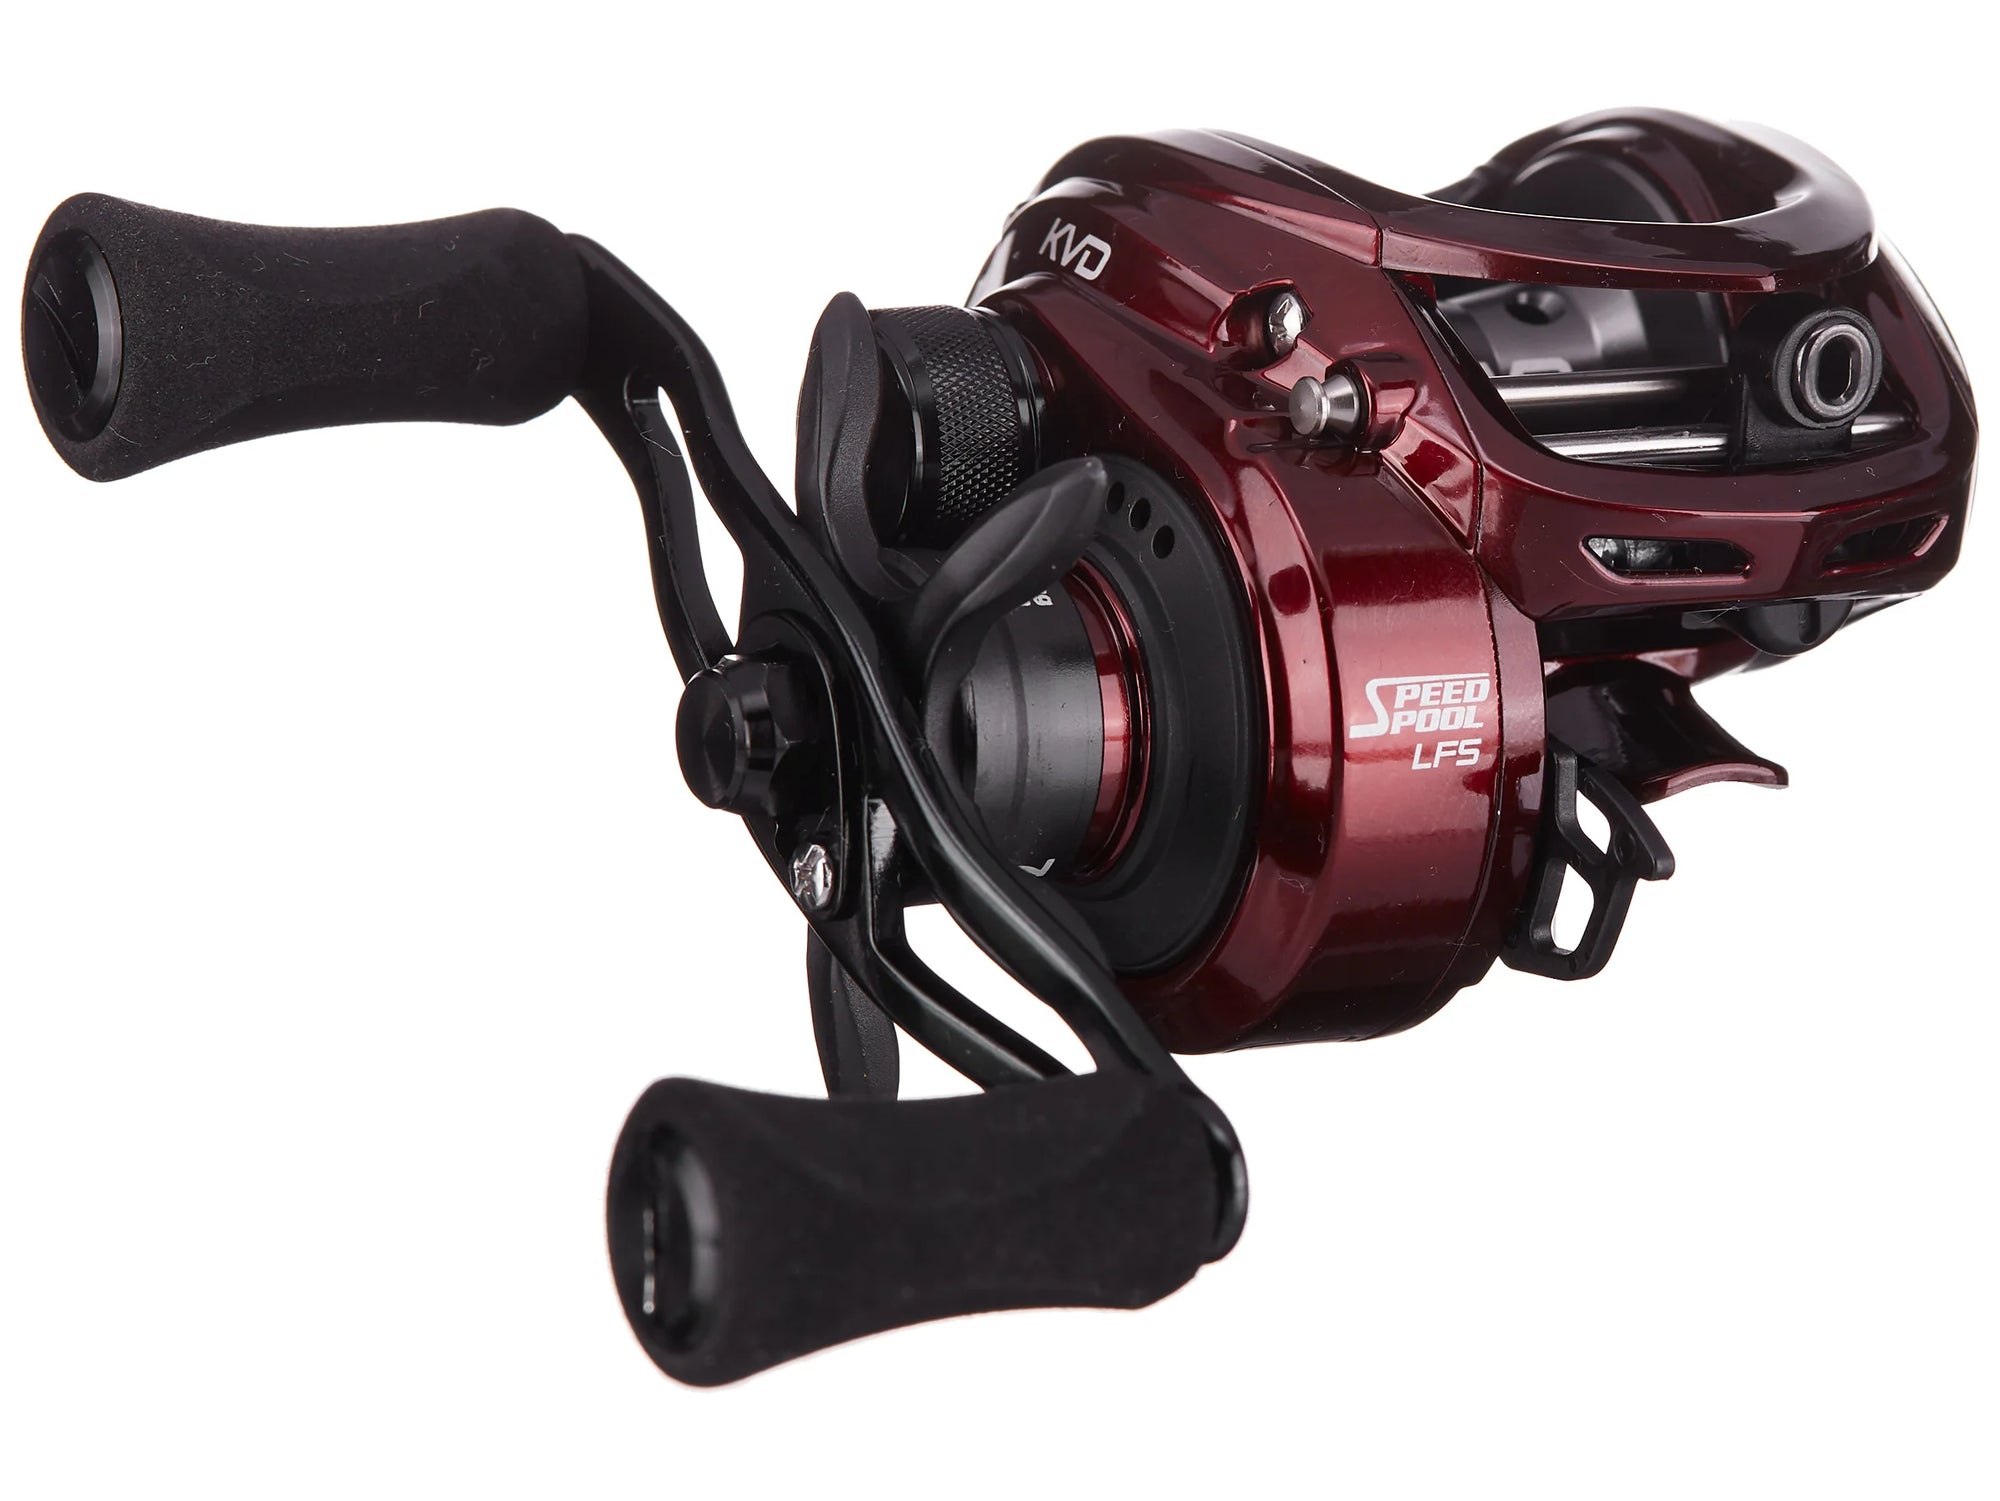 Lew's on X: The BB1 reel has long been a Lew's fan favorite and this year,  we've given a facelift to the classic reel! Check out the NEW BB1 Pro  Baitcast Reel